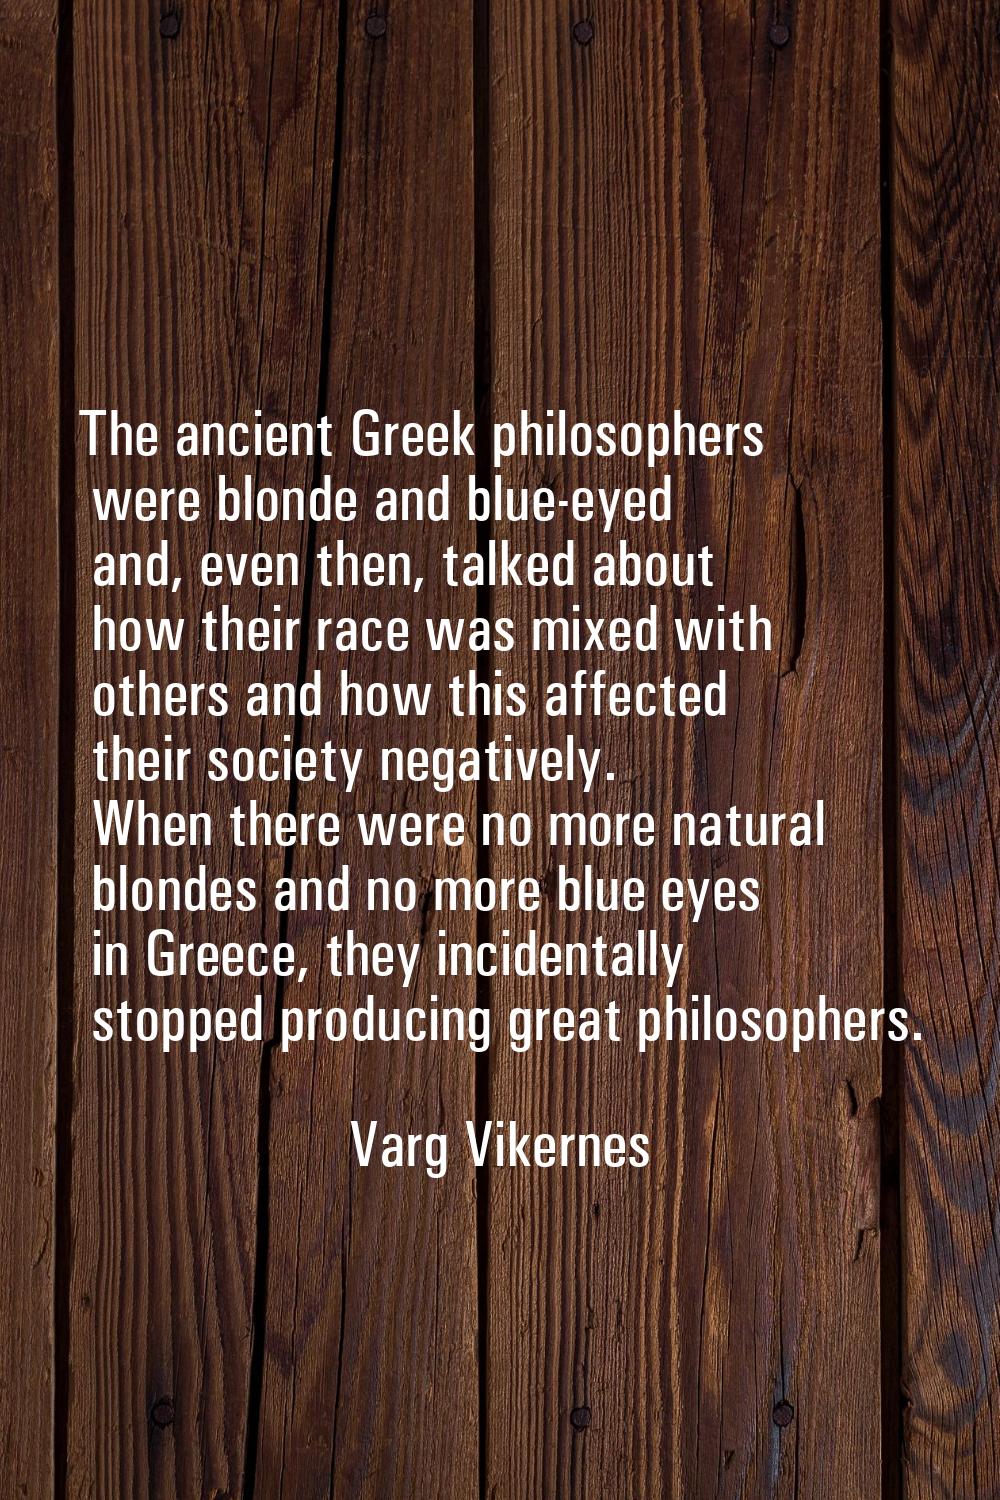 The ancient Greek philosophers were blonde and blue-eyed and, even then, talked about how their rac